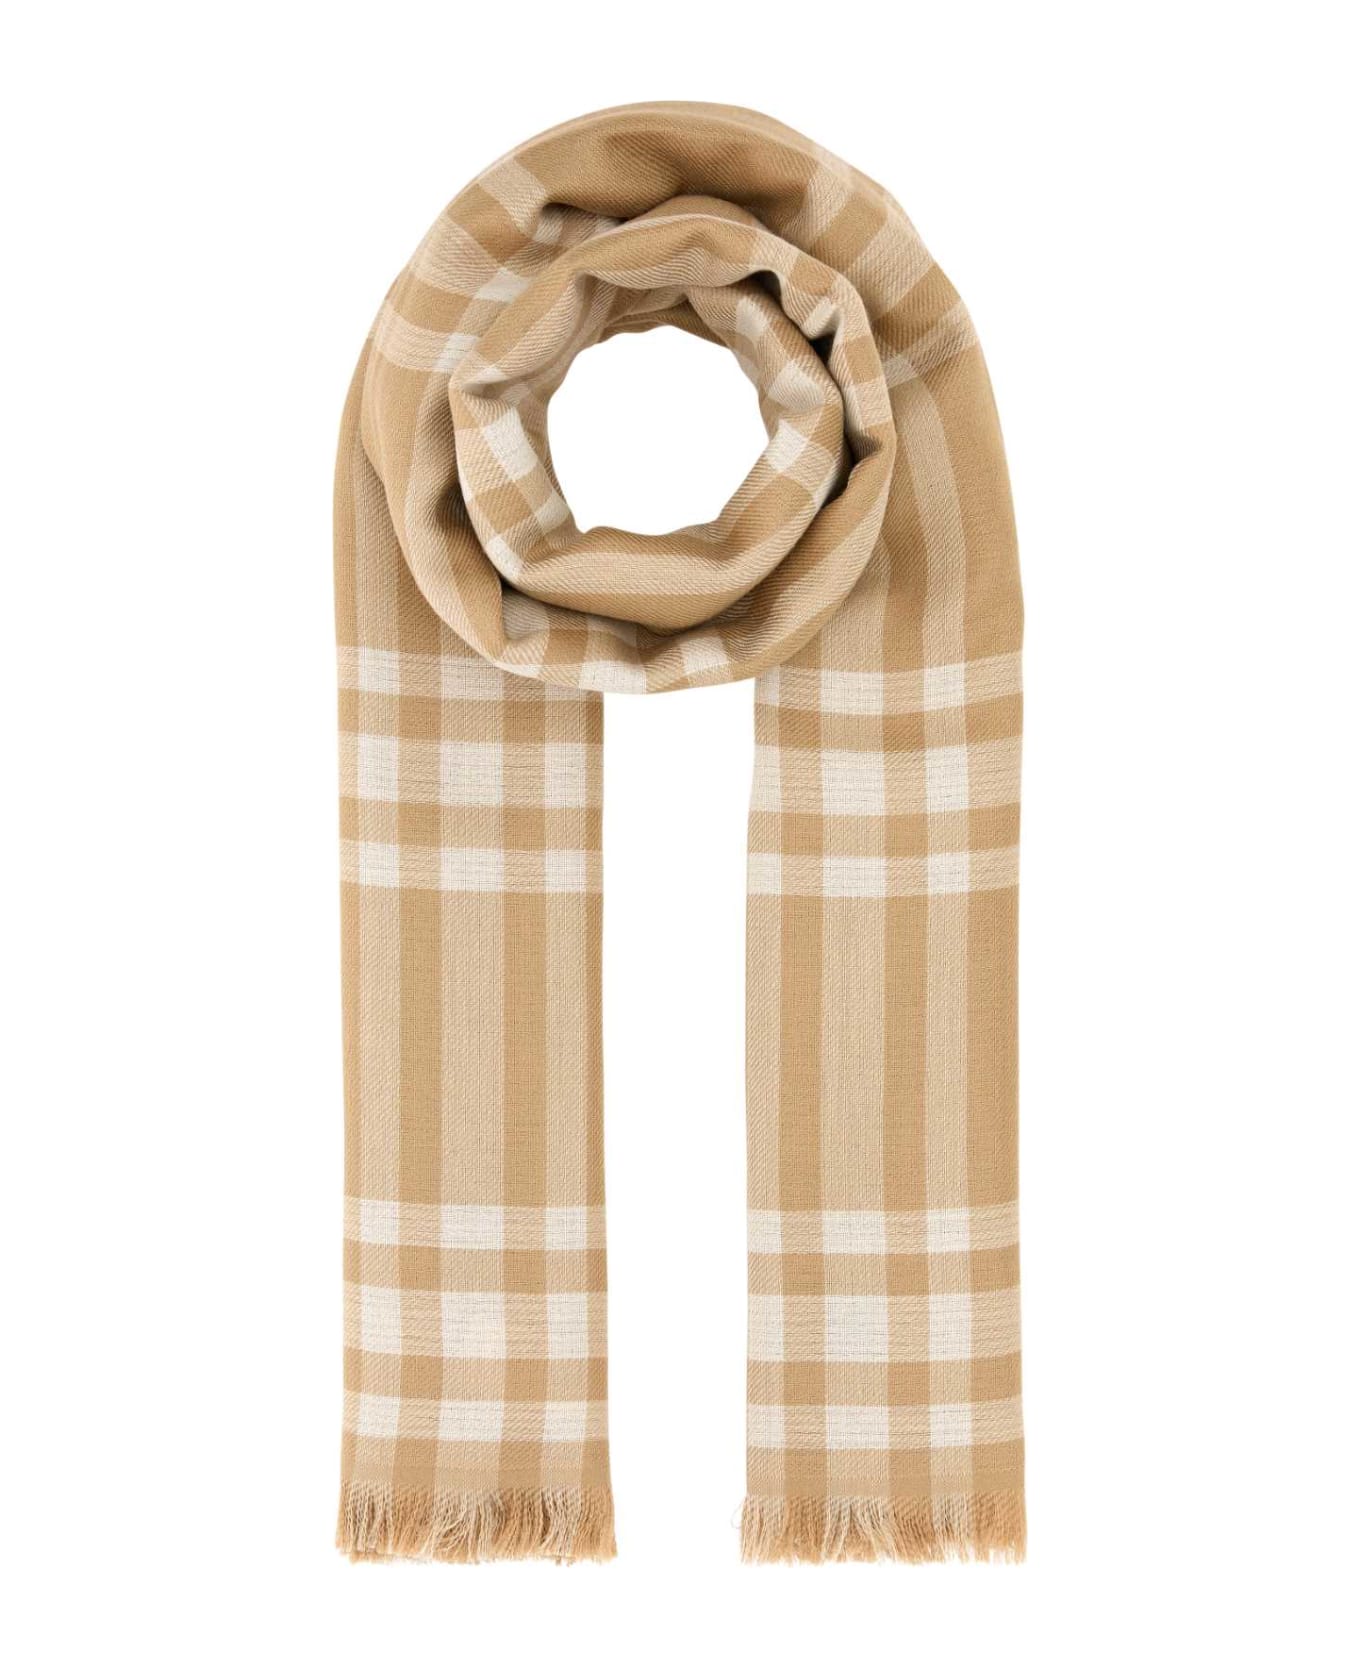 Burberry Embroidered Wool Blend Scarf - CAMEL